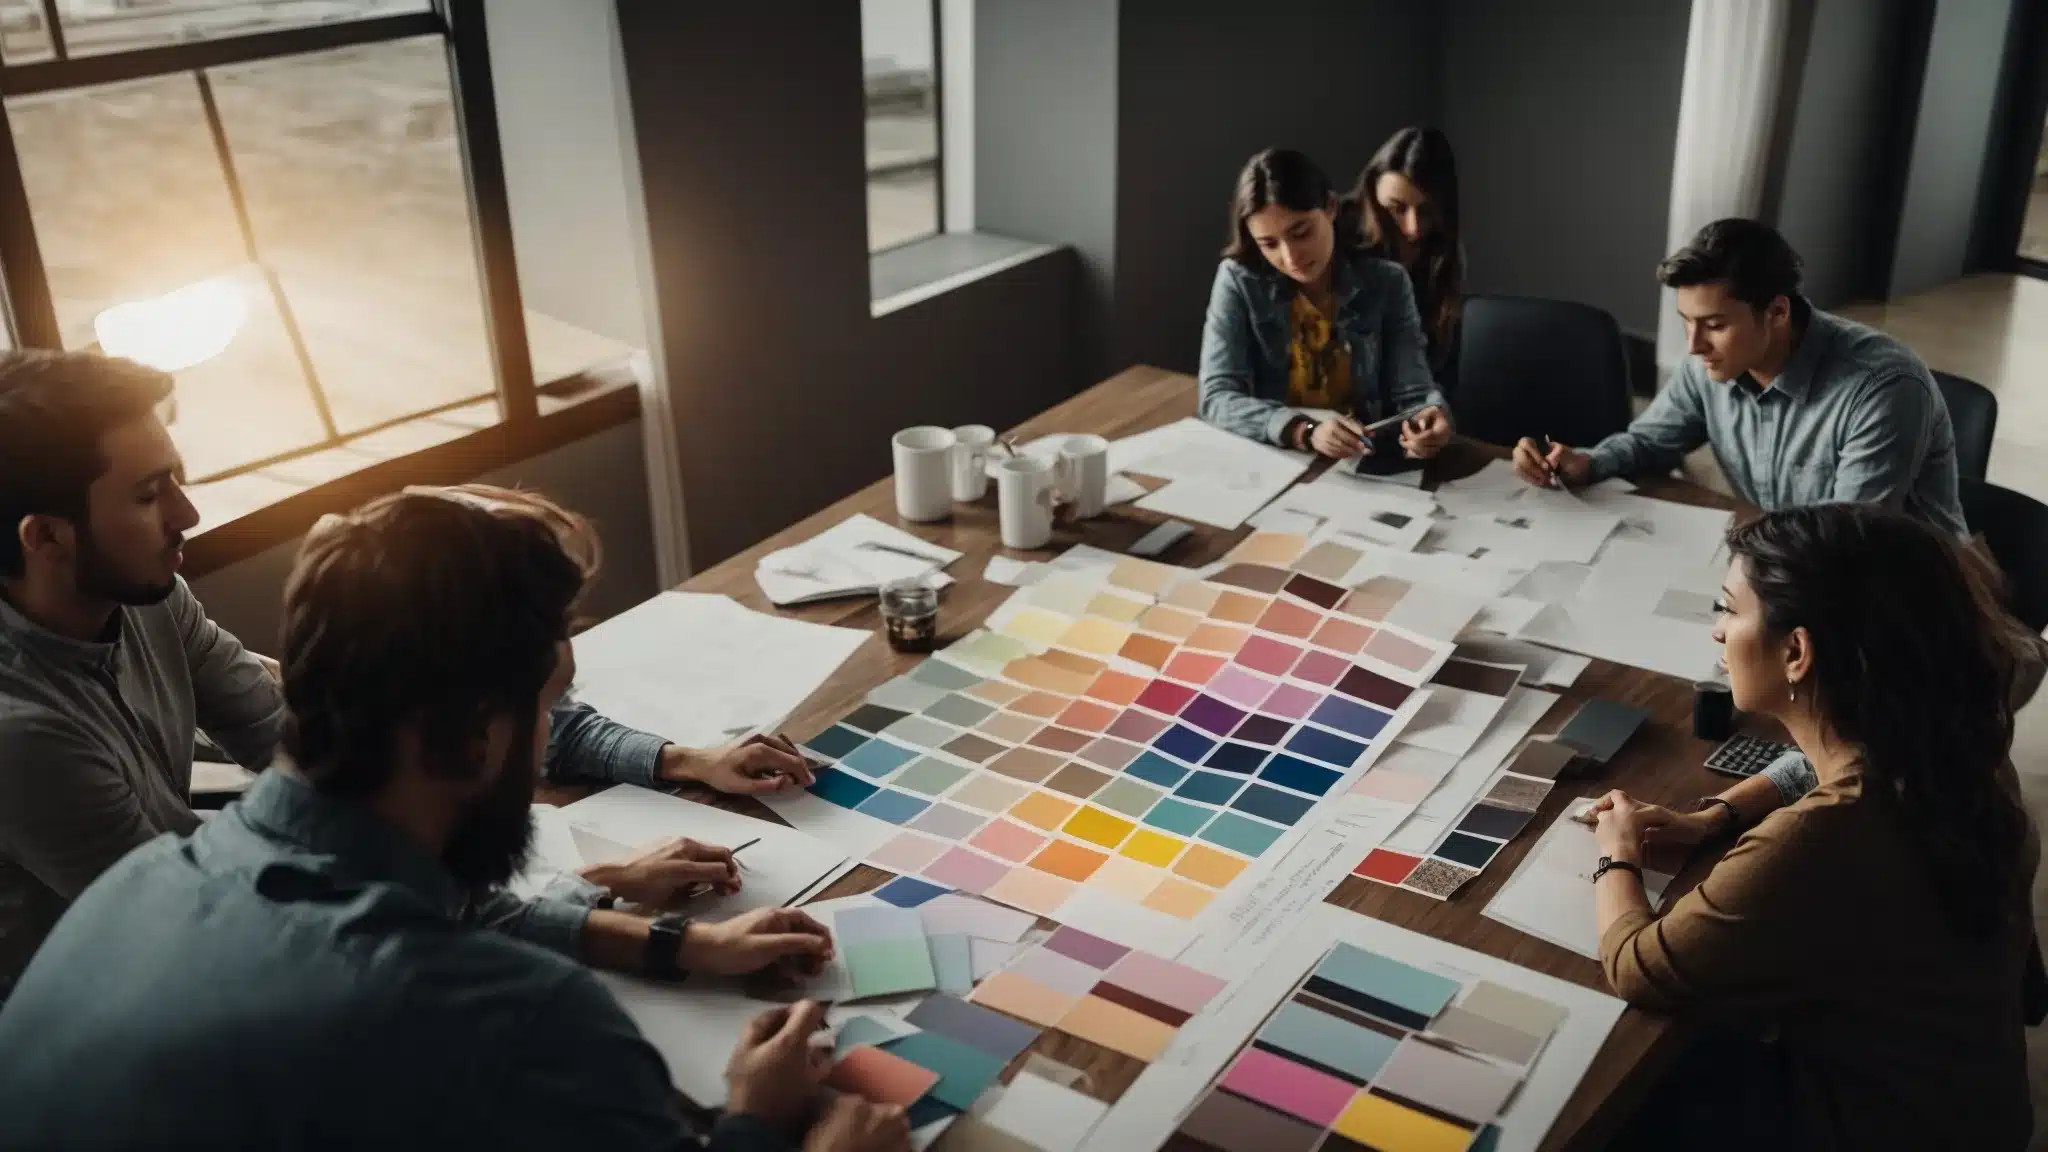 A Team Of Designers Brainstorming Around A Modern Table With Color Swatches And A Blank Screen Displaying A Logo Template.